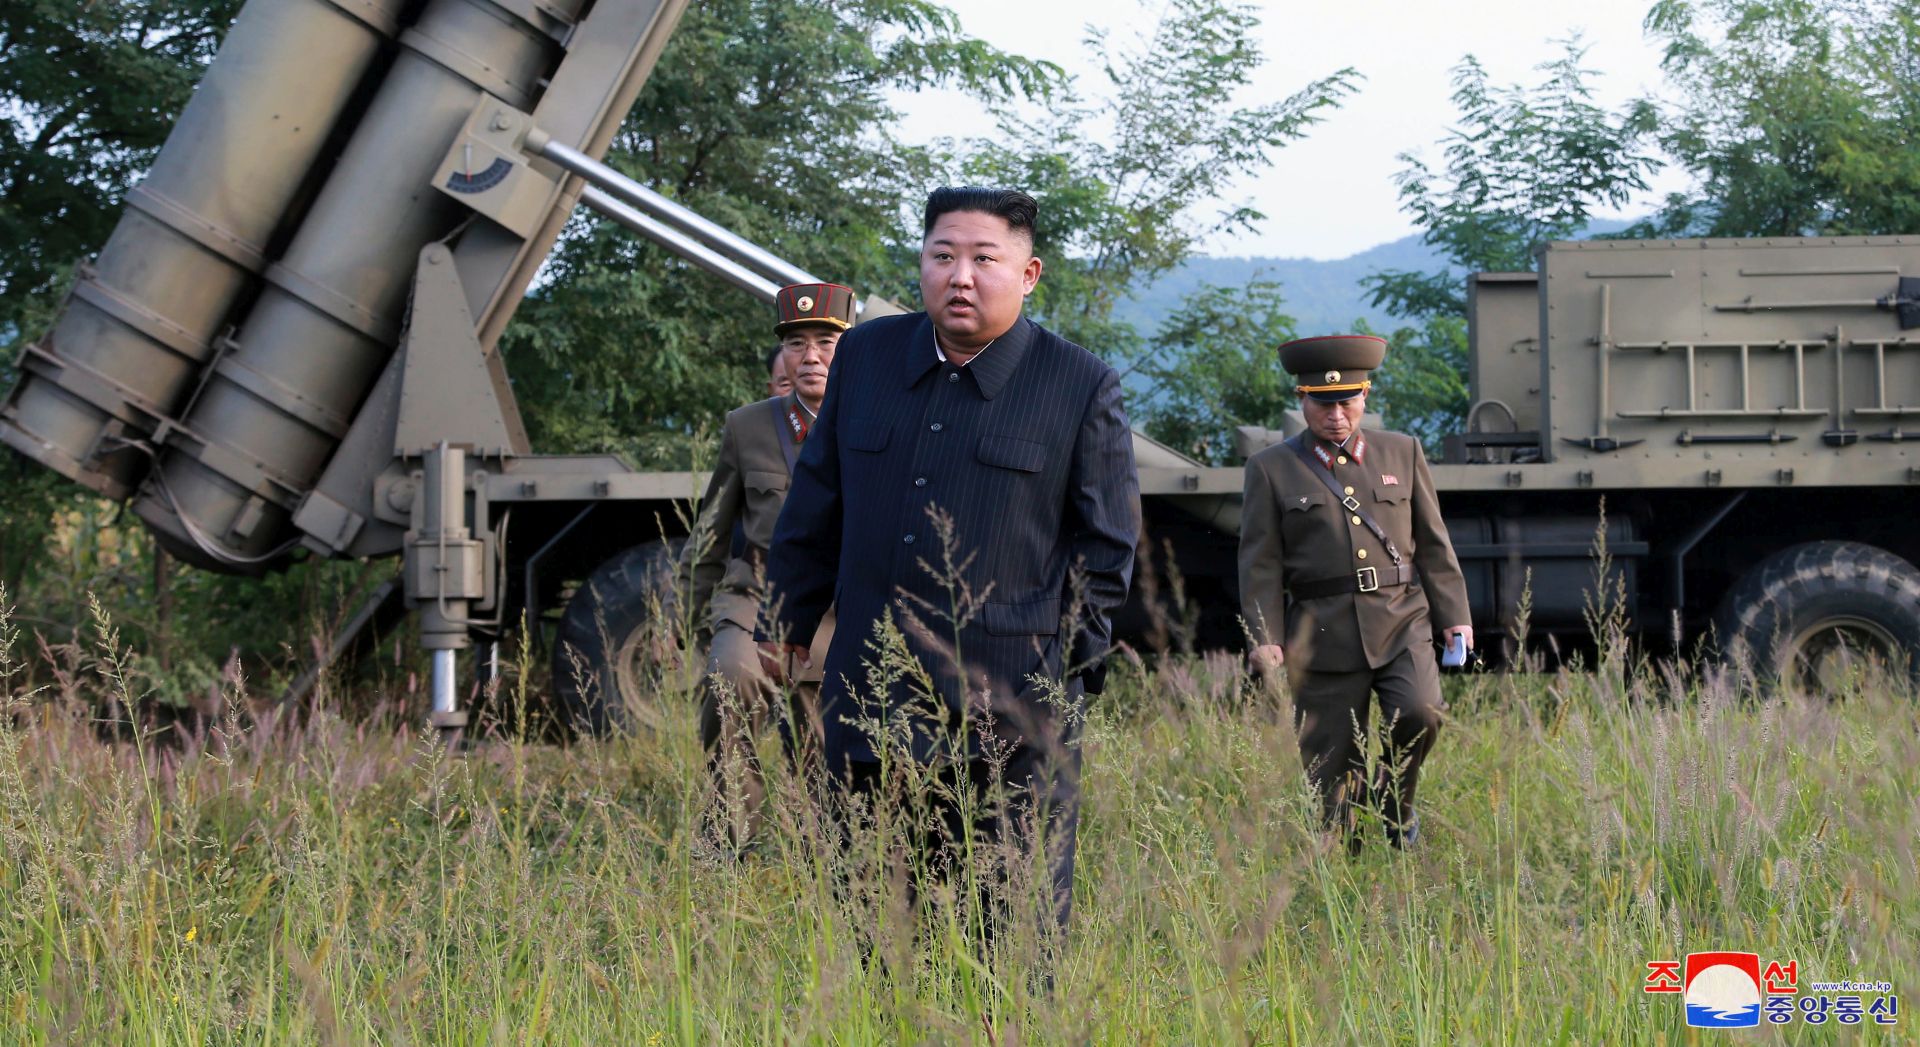 epa07833776 A photo released by the official North Korean Central News Agency (KCNA) shows Kim Jong Un, chairman of the Workers' Party of Korea, chairman of the State Affairs Commission of the Democratic People's Republic of Korea and supreme commander of the armed forces of the DPRK, giving field guidance to the test-fire of a super-large multiple rocket launcher at an unknown location in North Korea, 11 September 2019.  EPA/KCNA   EDITORIAL USE ONLY  EDITORIAL USE ONLY